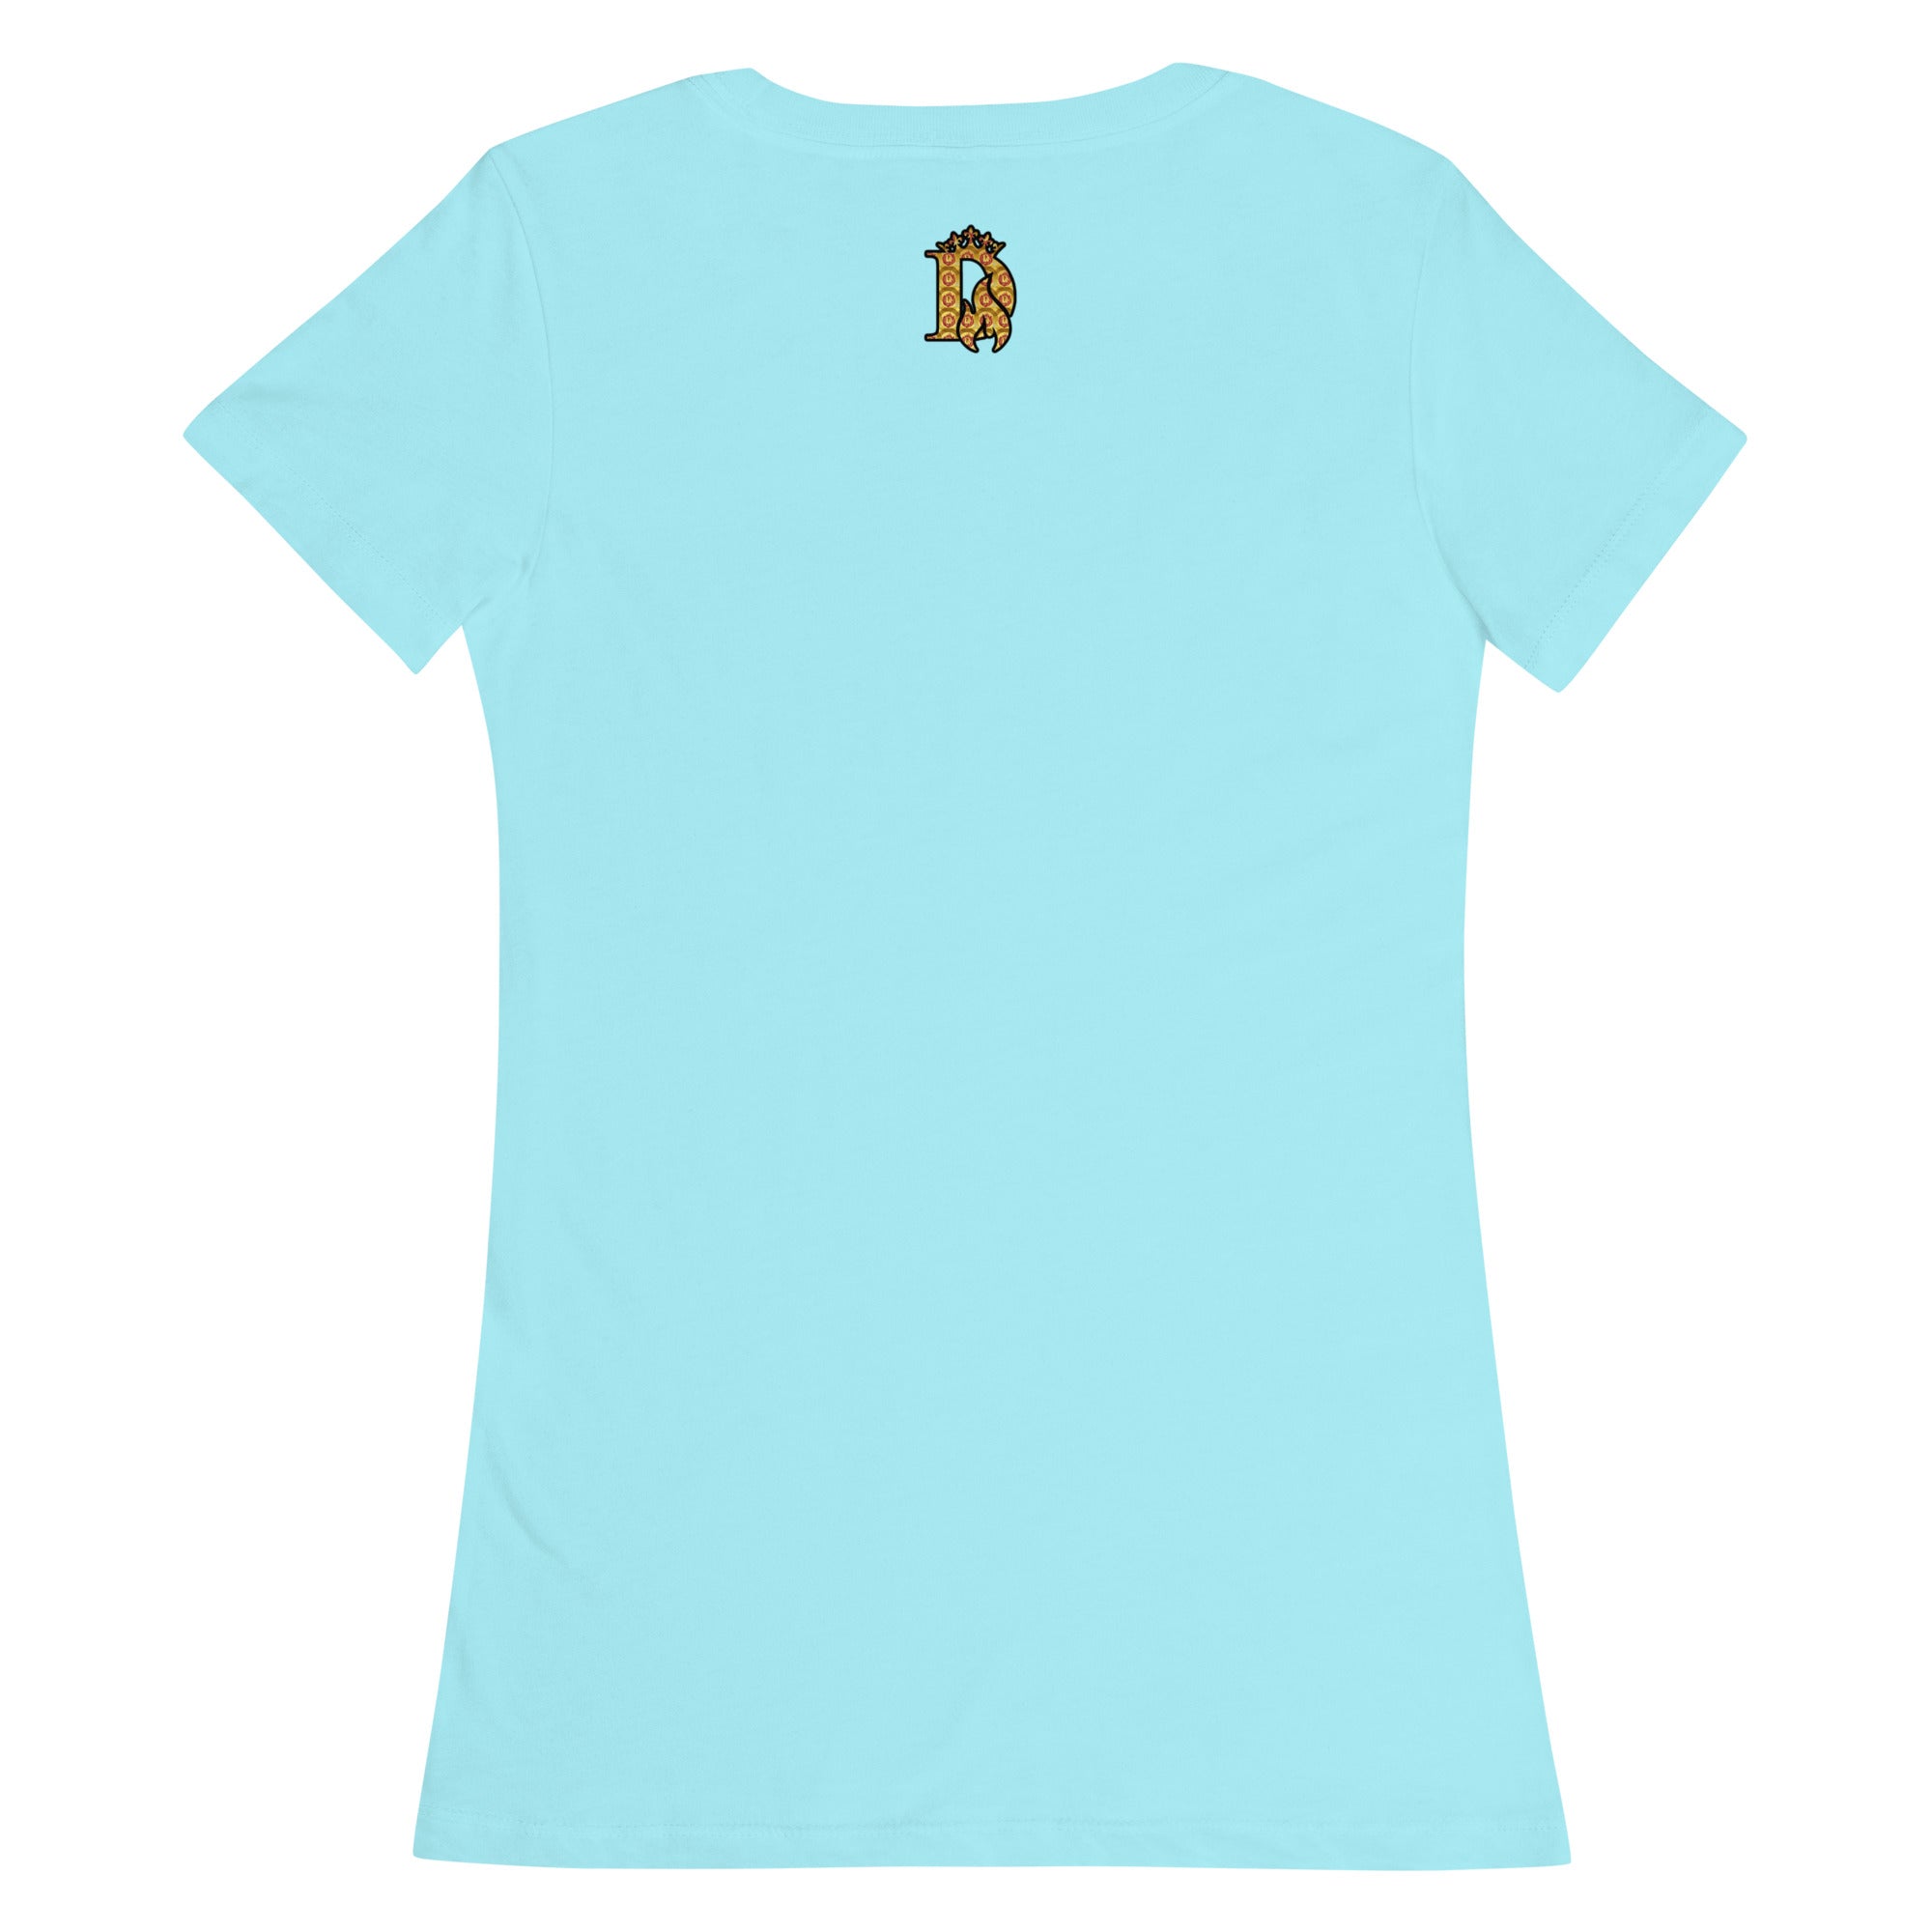 Women’s fitted Hustle Babe Blue Tee